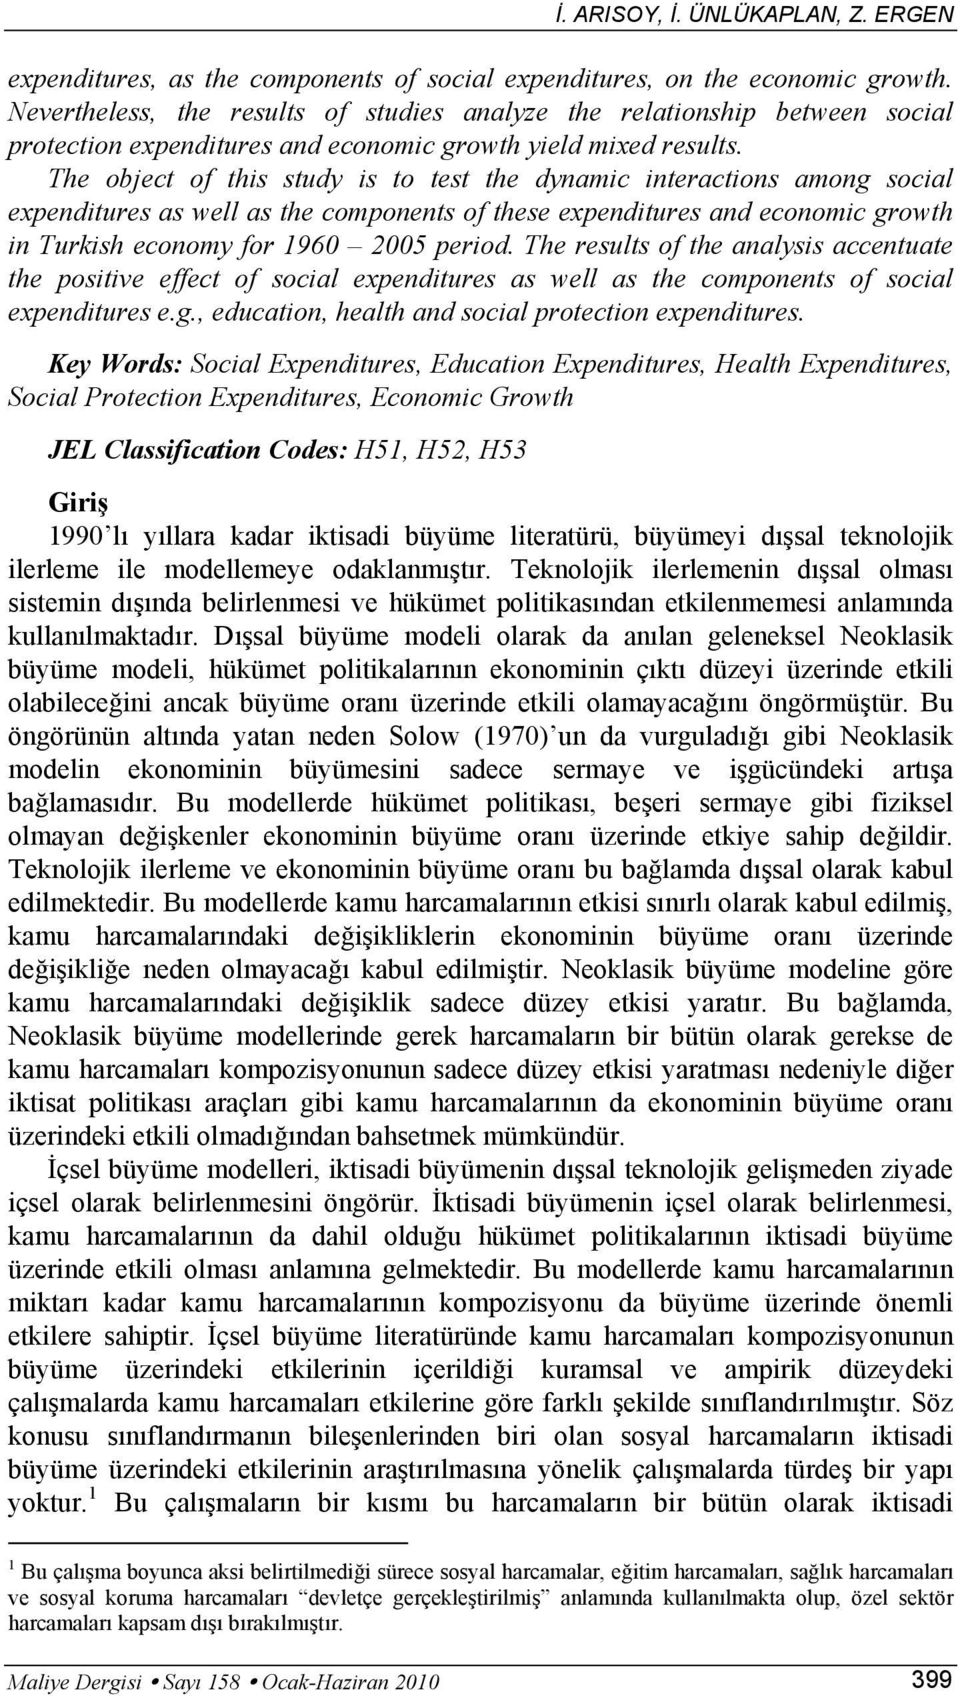 The object of this study is to test the dynmic interctions mong socil expenditures s well s the components of these expenditures nd economic growth in Turkish economy for 1960 2005 period.